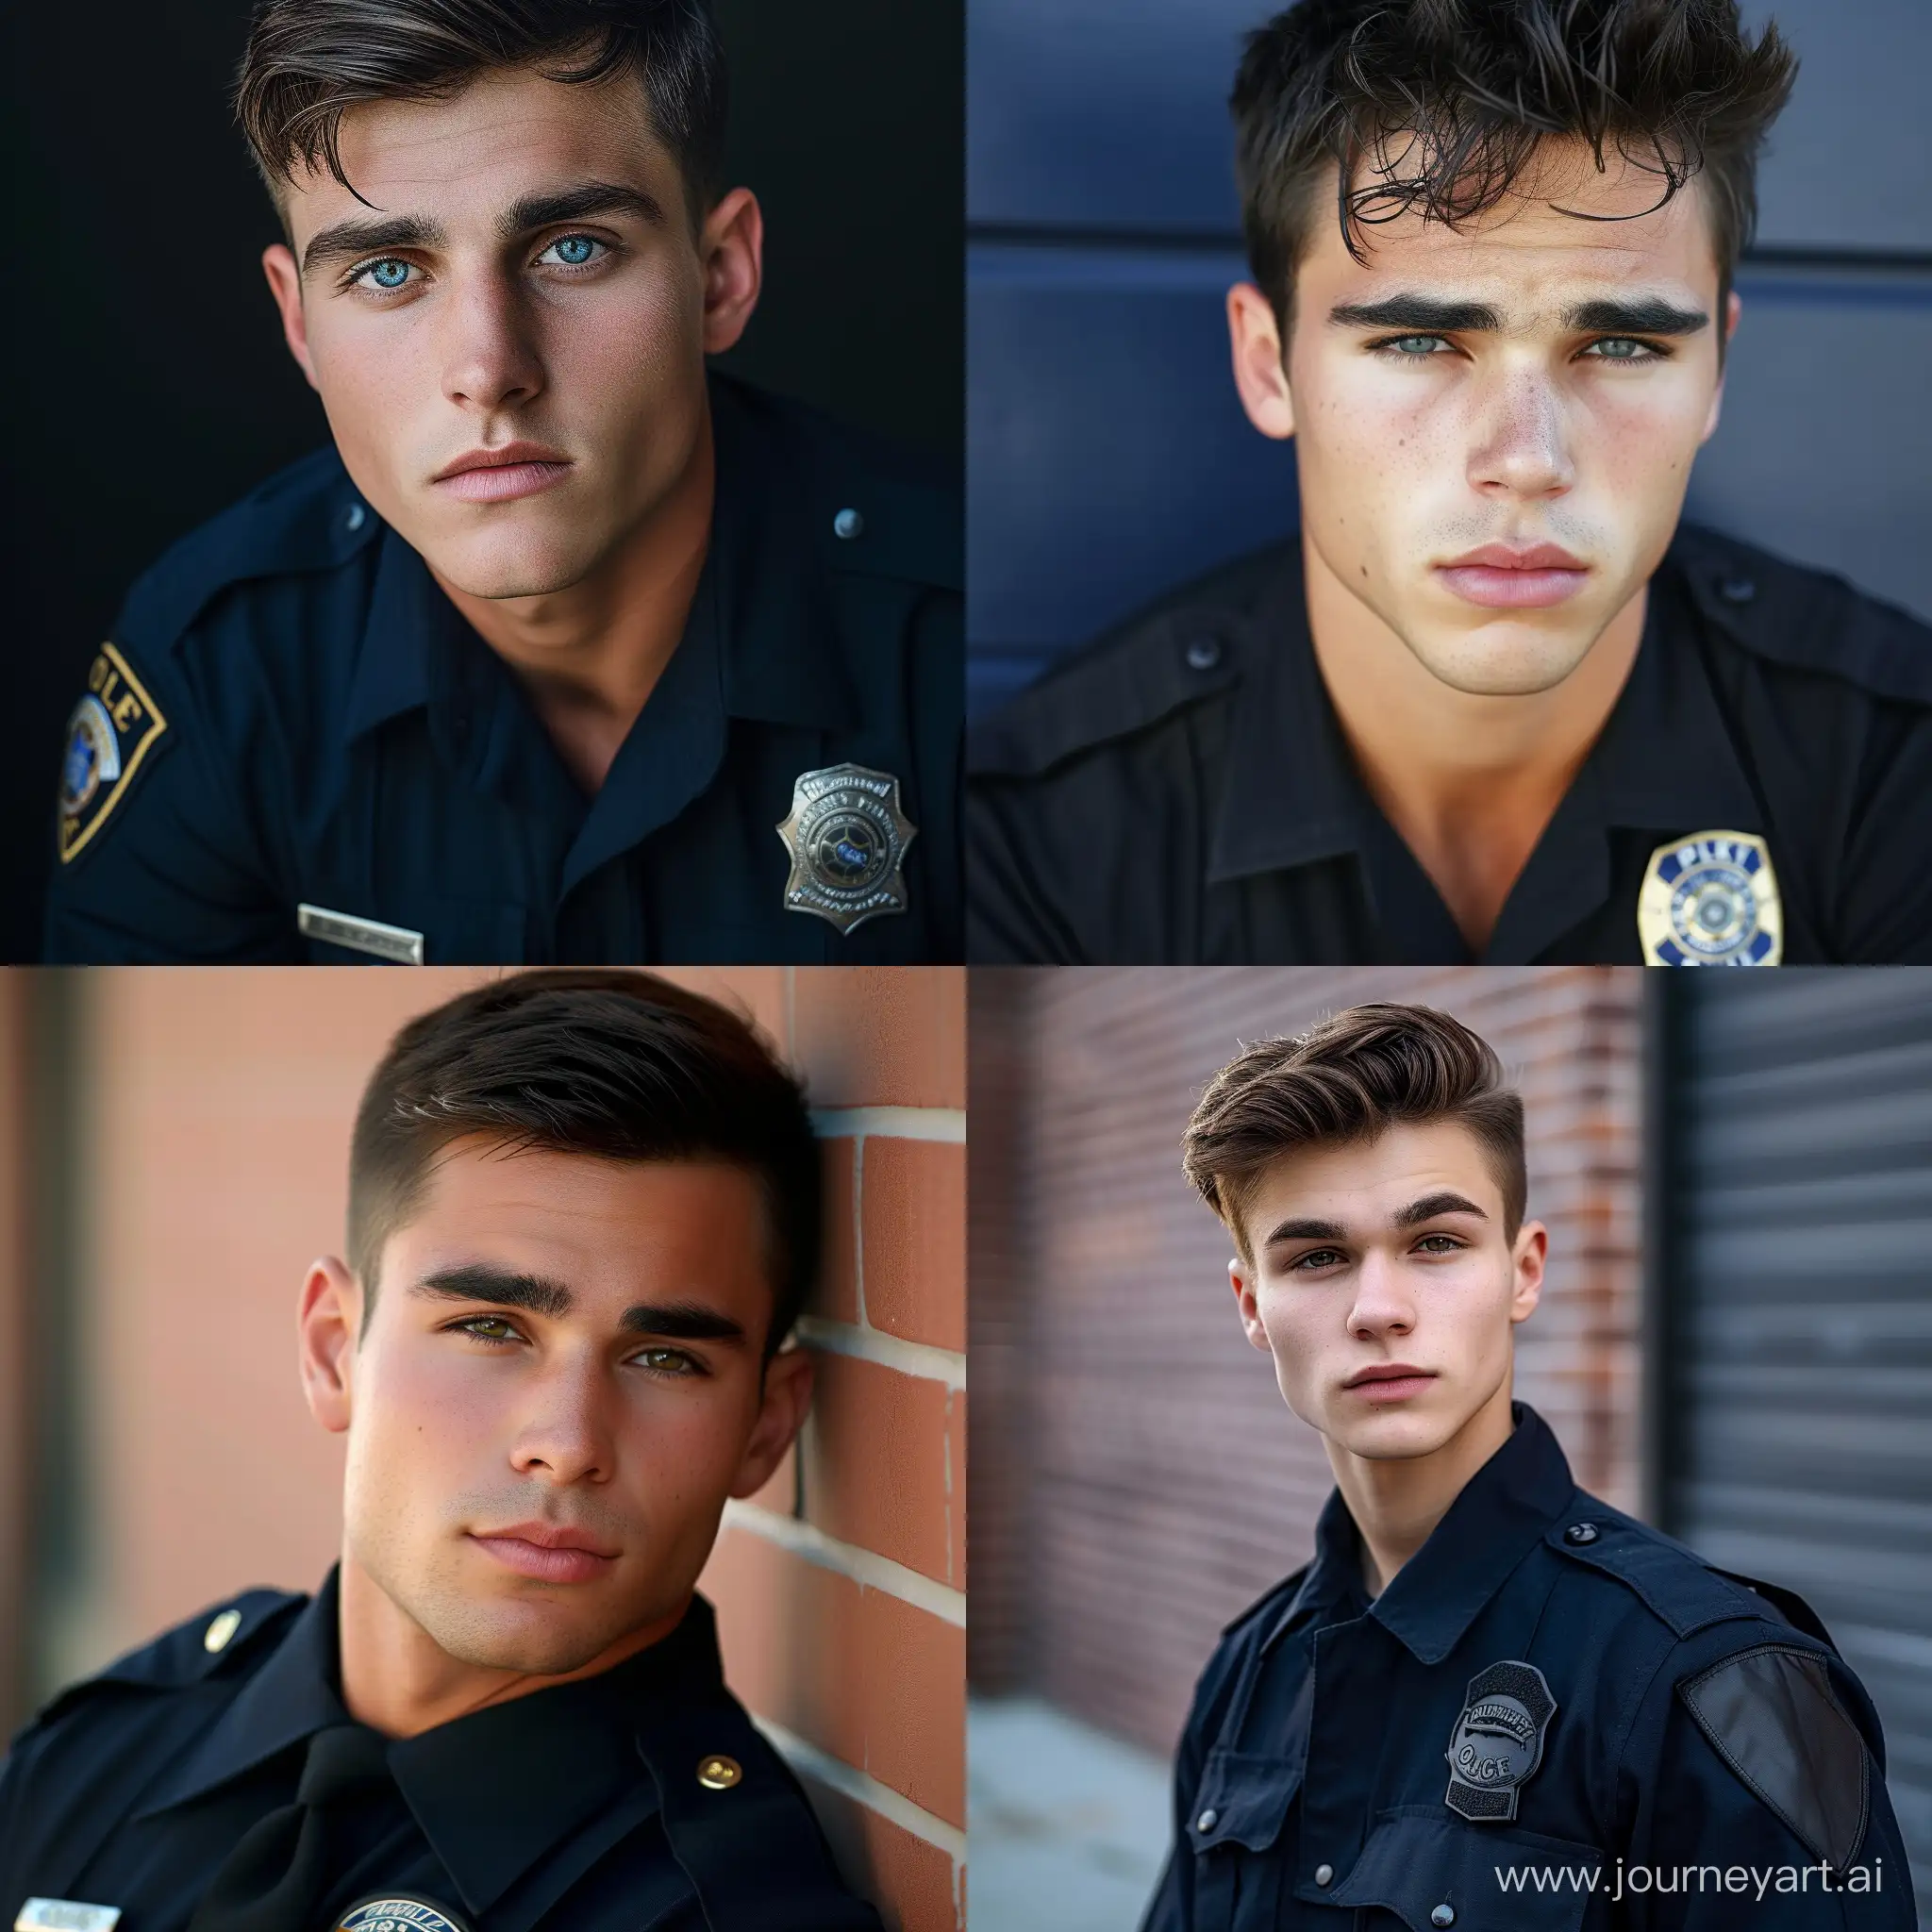 Medium-shot photo of an Attractive 19-year-old male cop